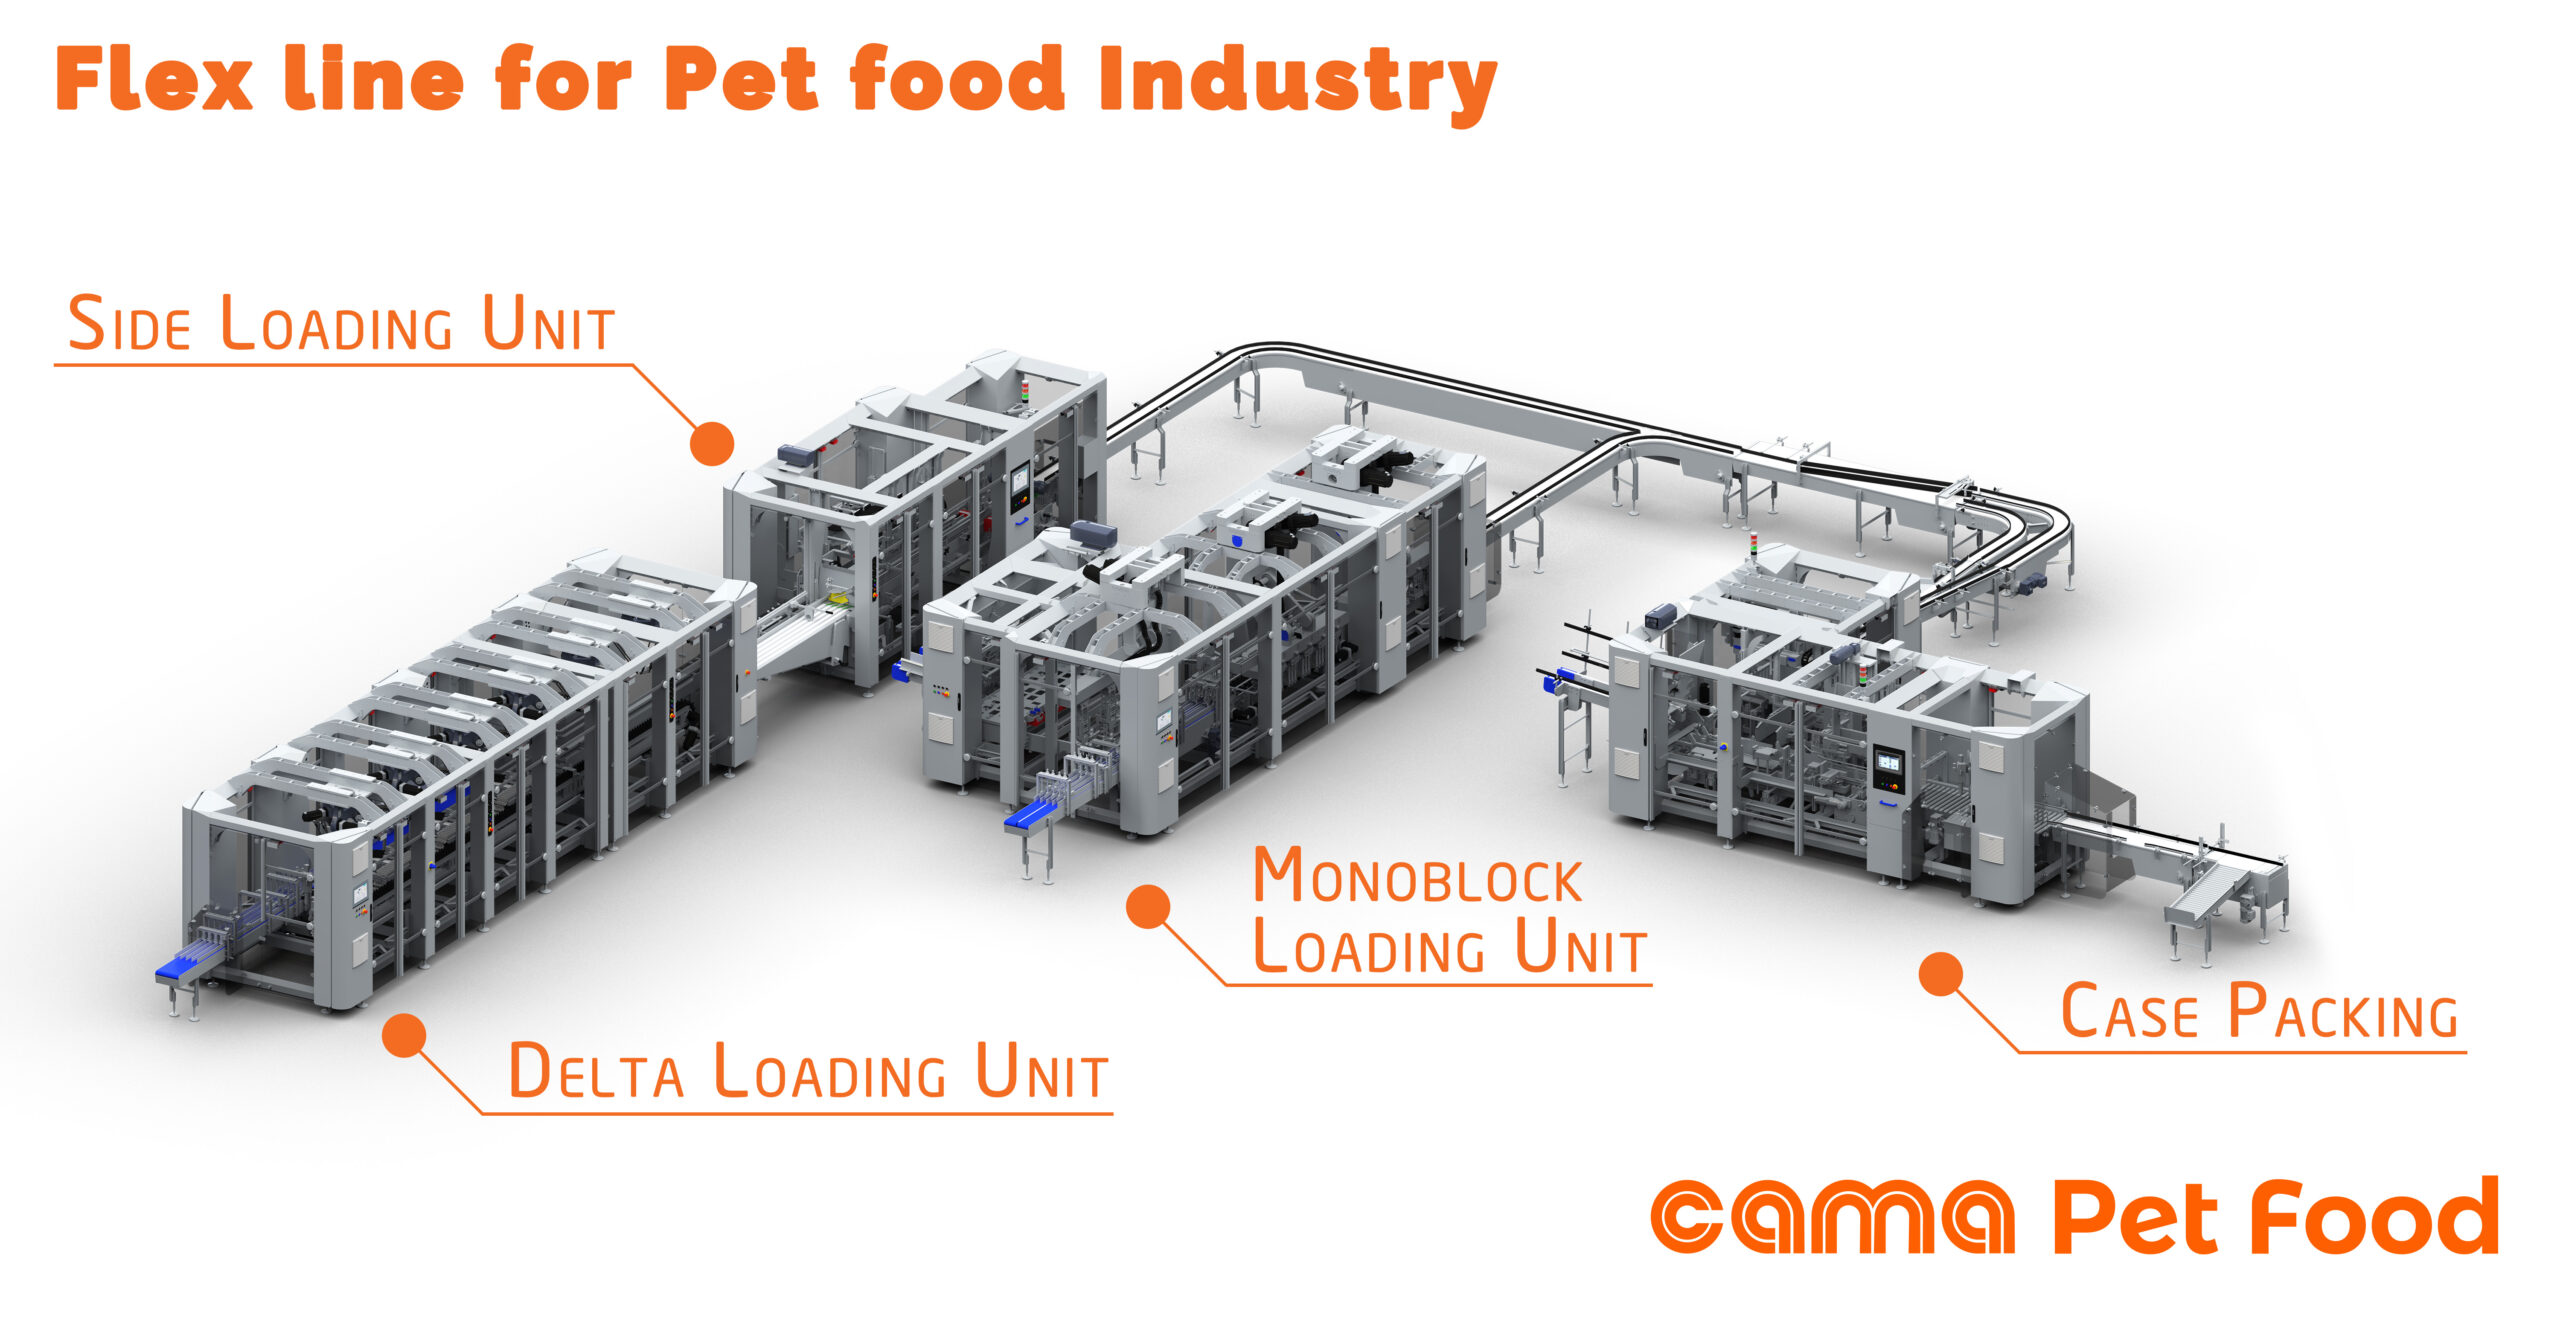 From tins, through trays and pouches and back to tins again! The pet food industry never stays still. What can you do to keep pace?